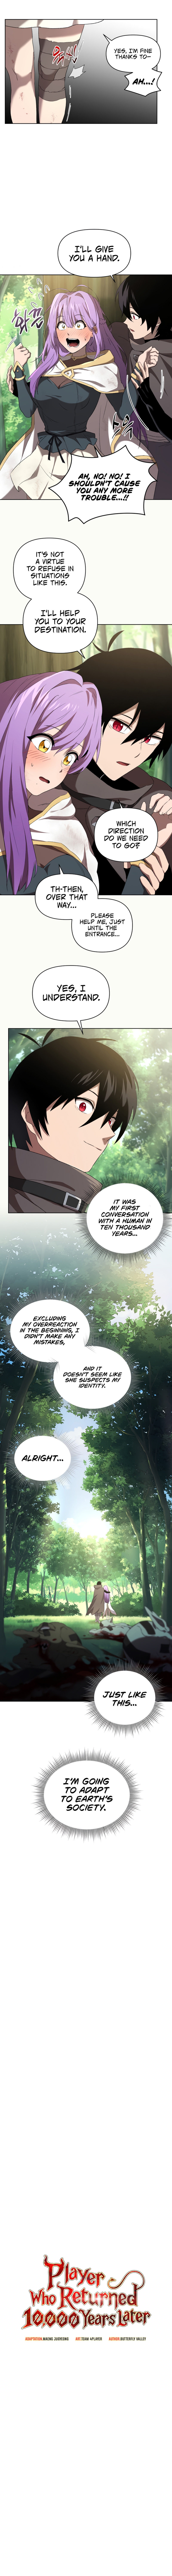 Player Who Returned 10,000 Years Later - Chapter 5 Page 5